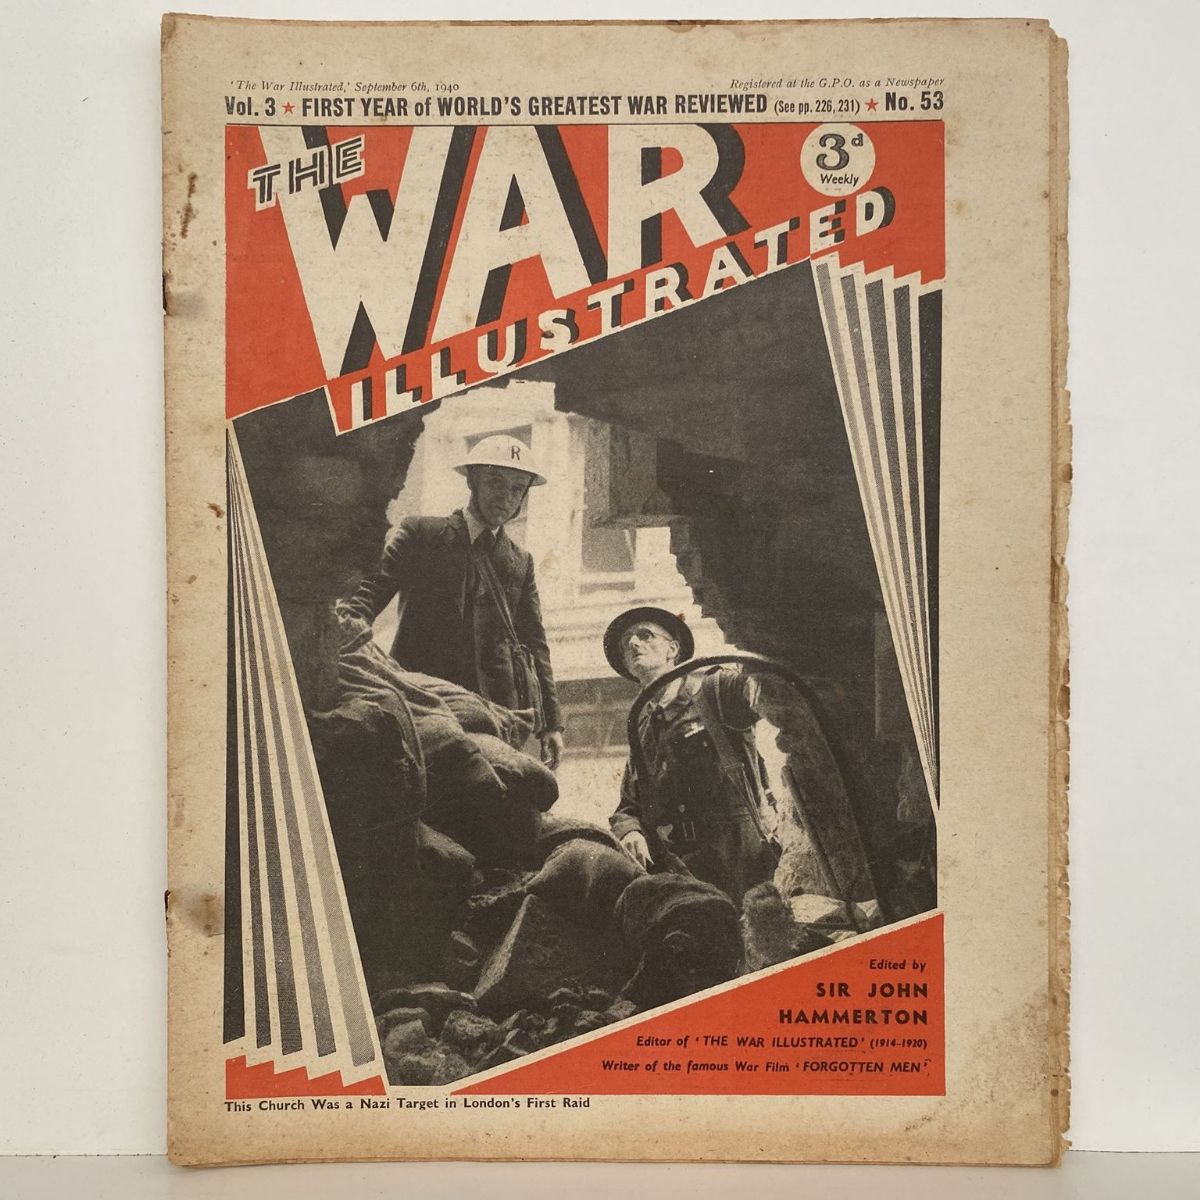 THE WAR ILLUSTRATED - Vol 3, No 53, 6th Sept 1940